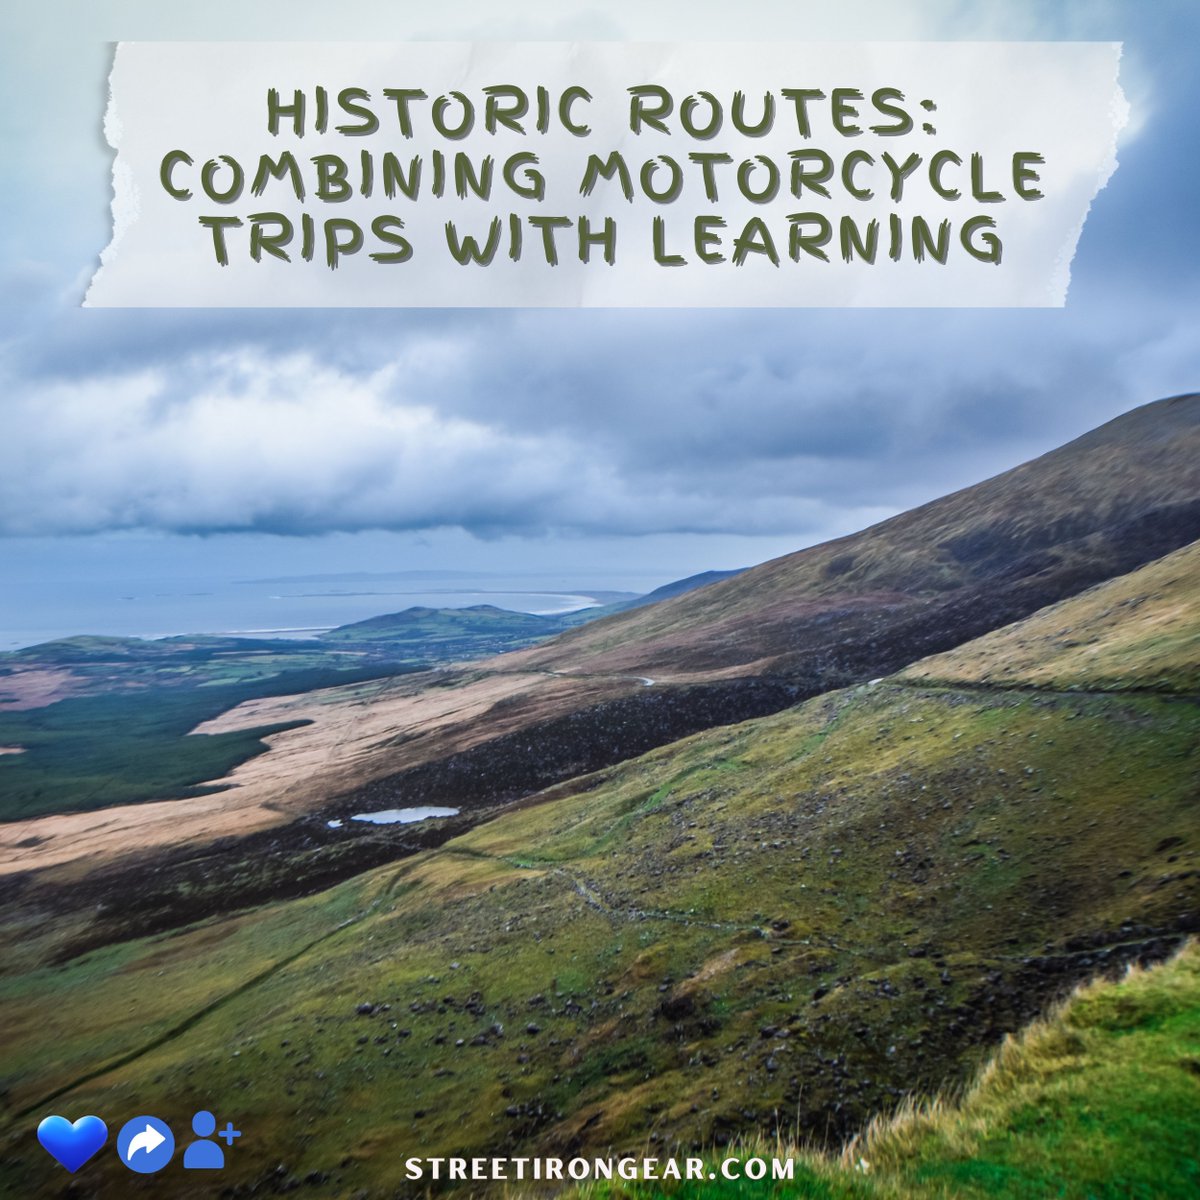 Historic Routes: Combining Motorcycle Trips With Learning 

Read On
buff.ly/4aFbK2C 

#UniqueDestinations #MotoTravel #RidePlanning #StreetIronGear #Route66 #DestinationPlanning